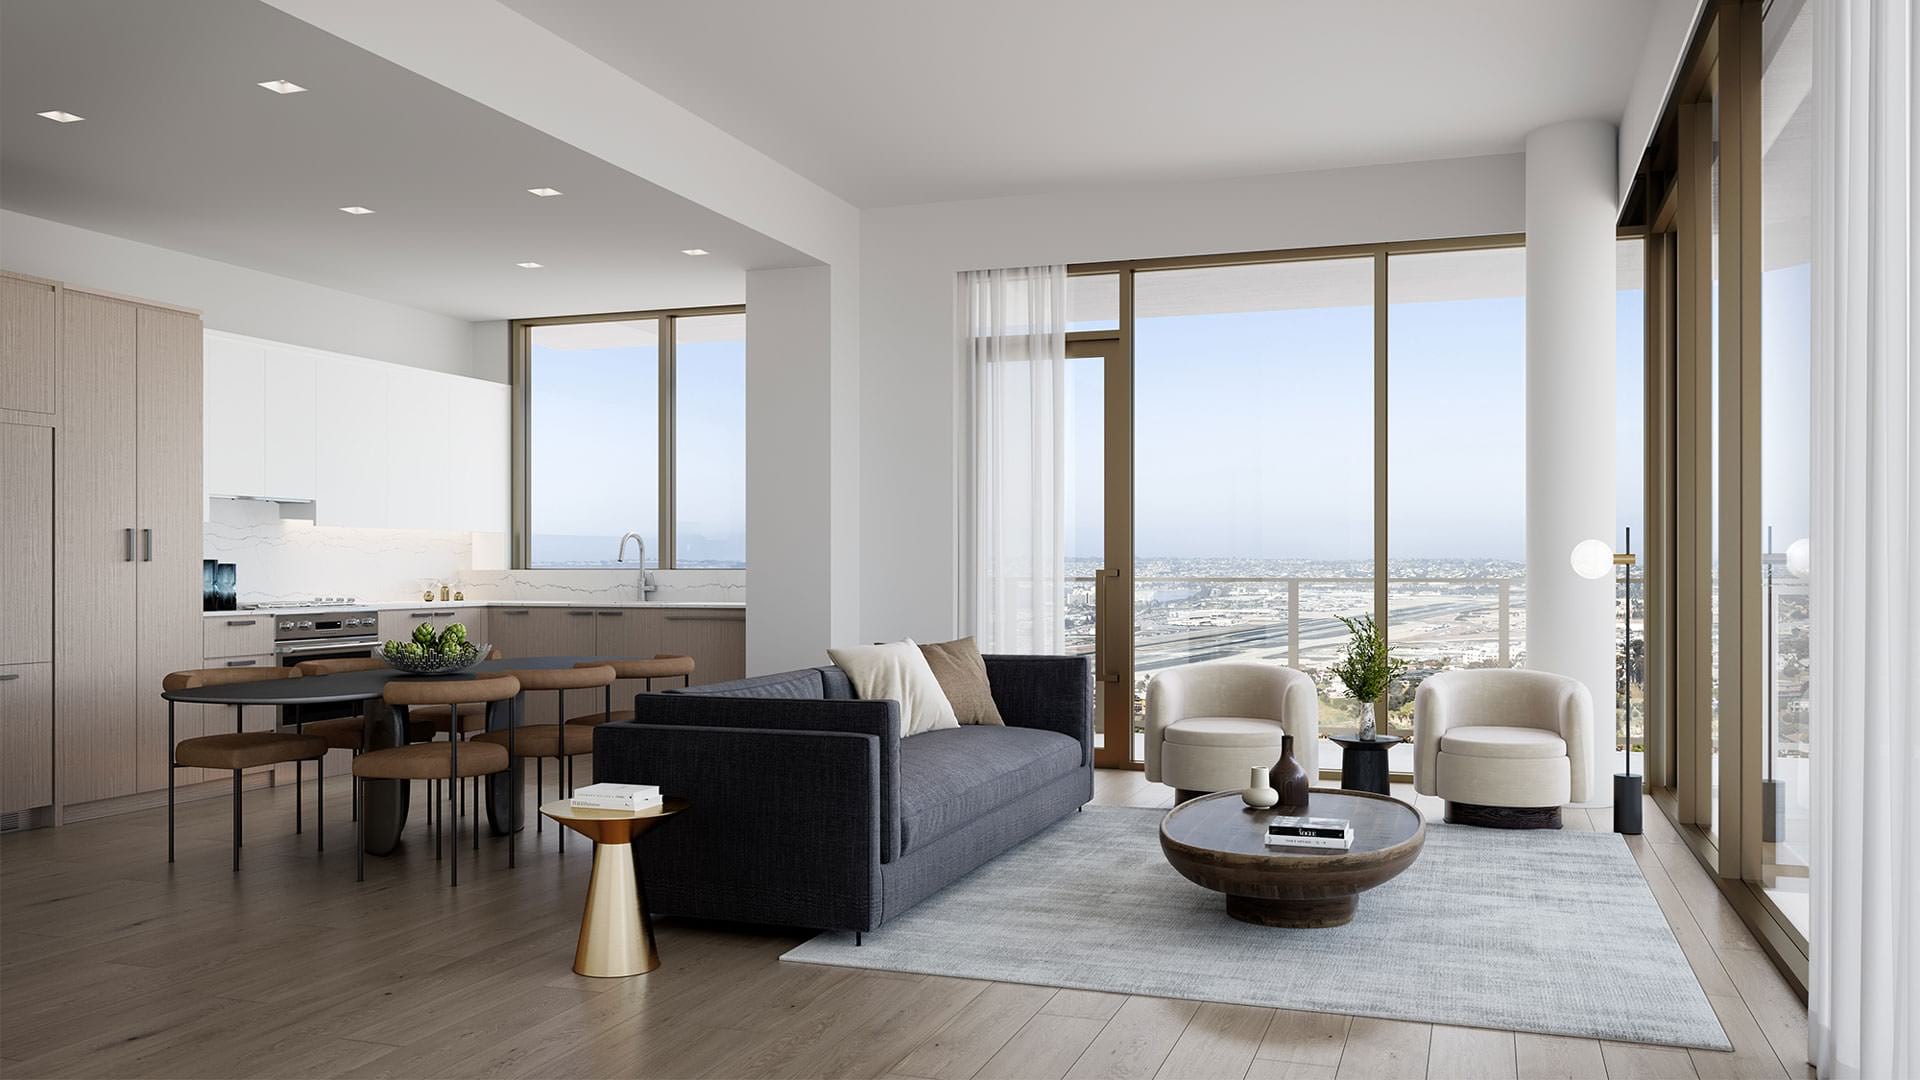 Spacious and well lit living room with wood floors and large floor to ceiling windows with a city view.